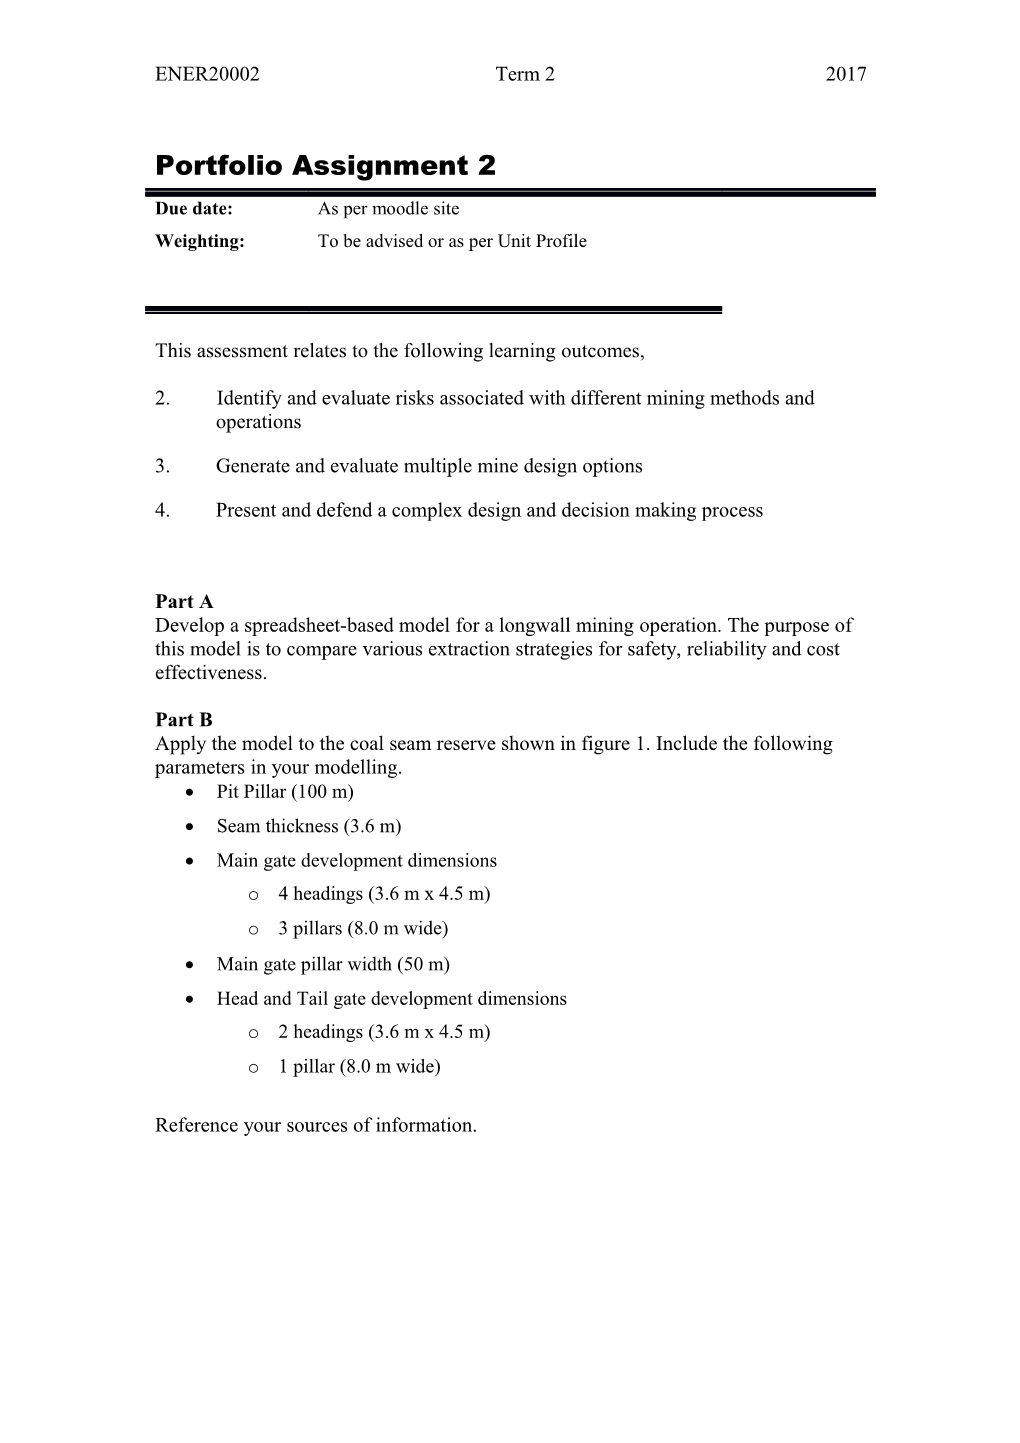 This Assessment Relates to the Following Learning Outcomes